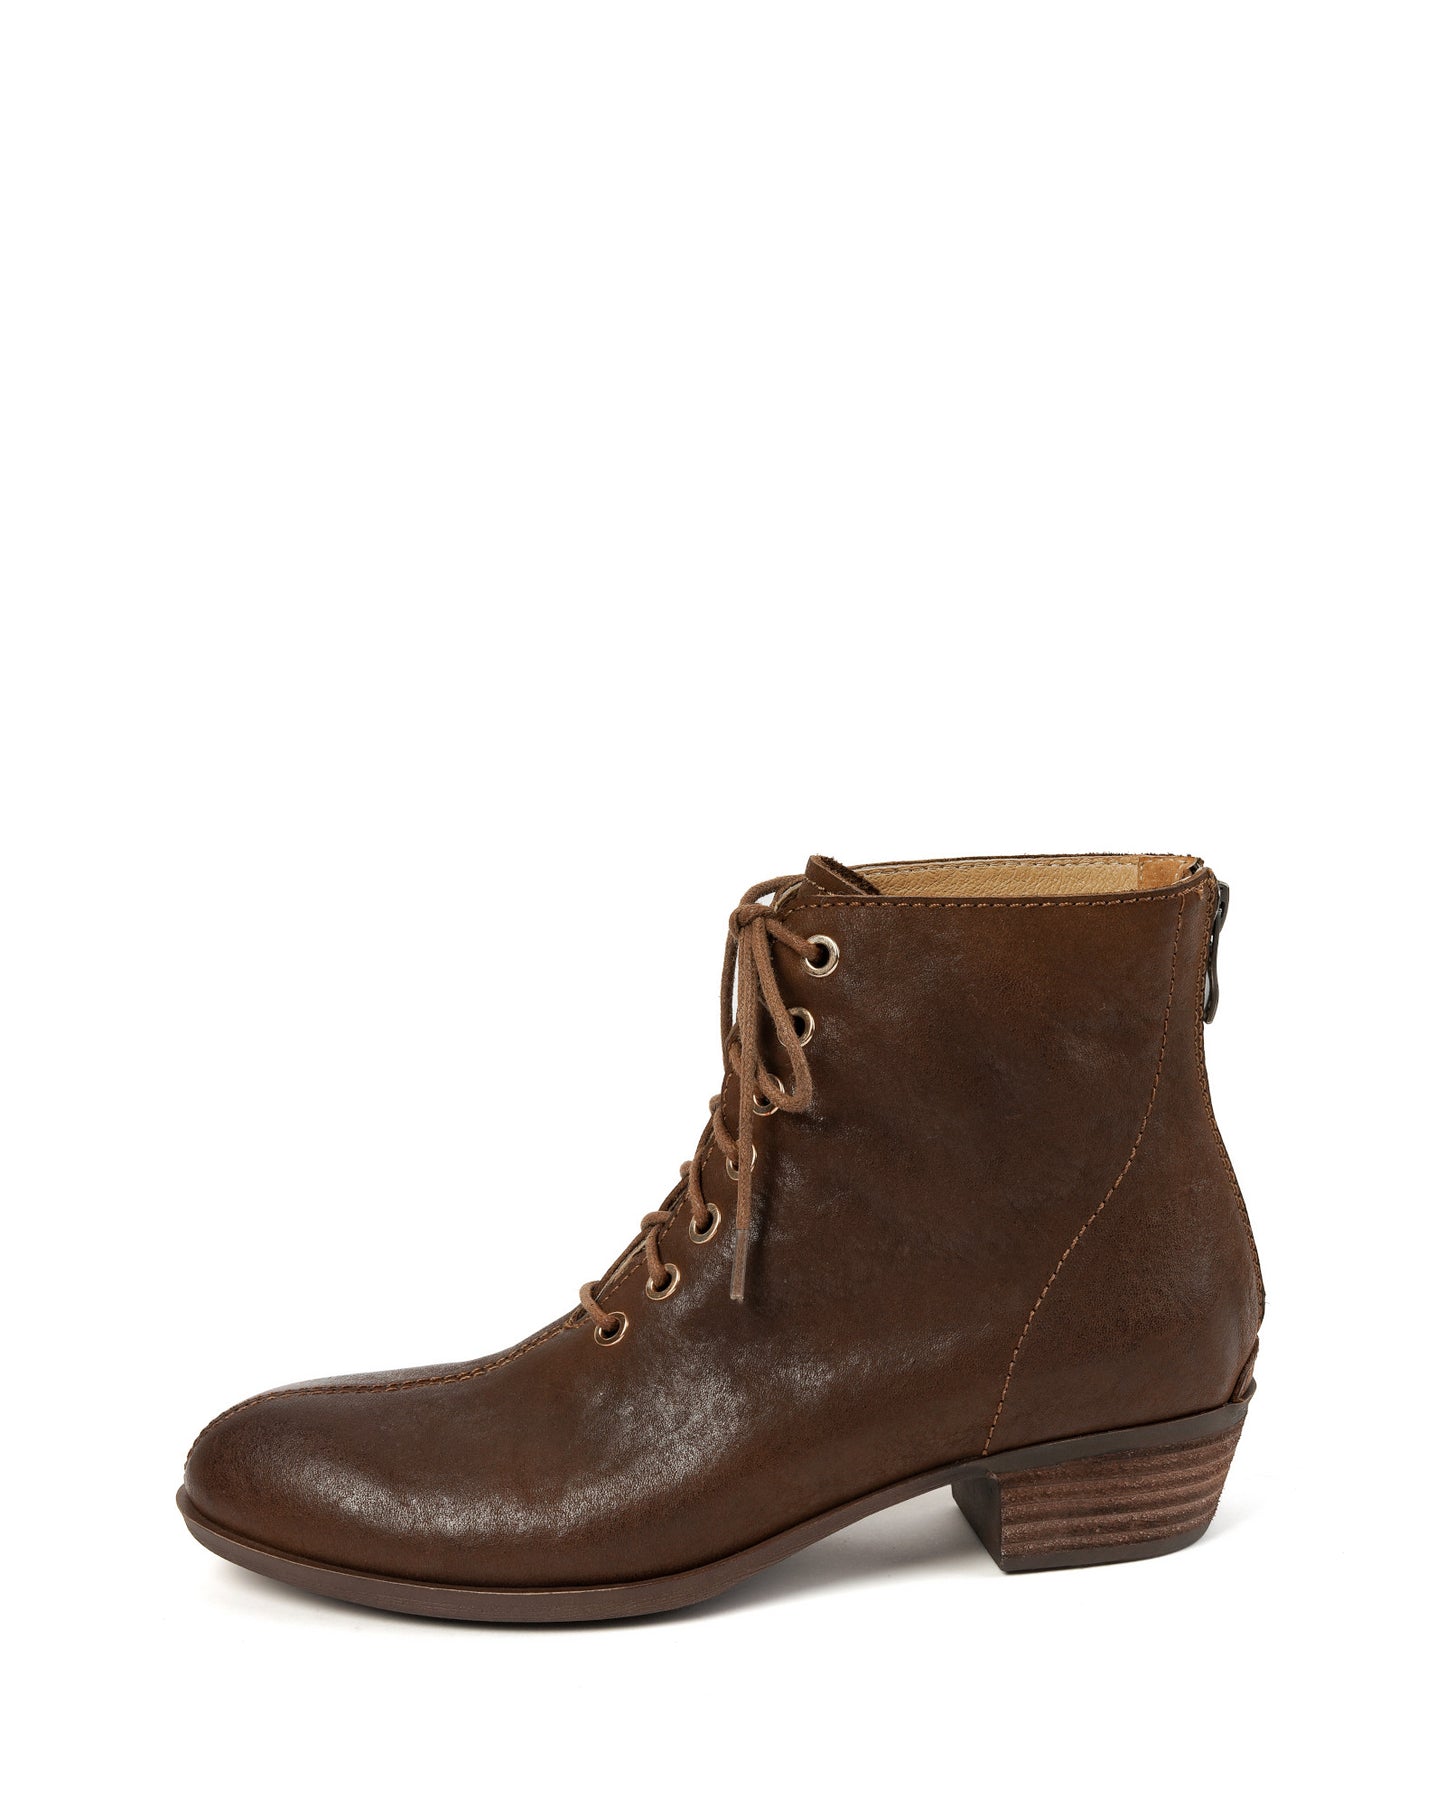 Kenora-ankle-boots-brown-leather-1